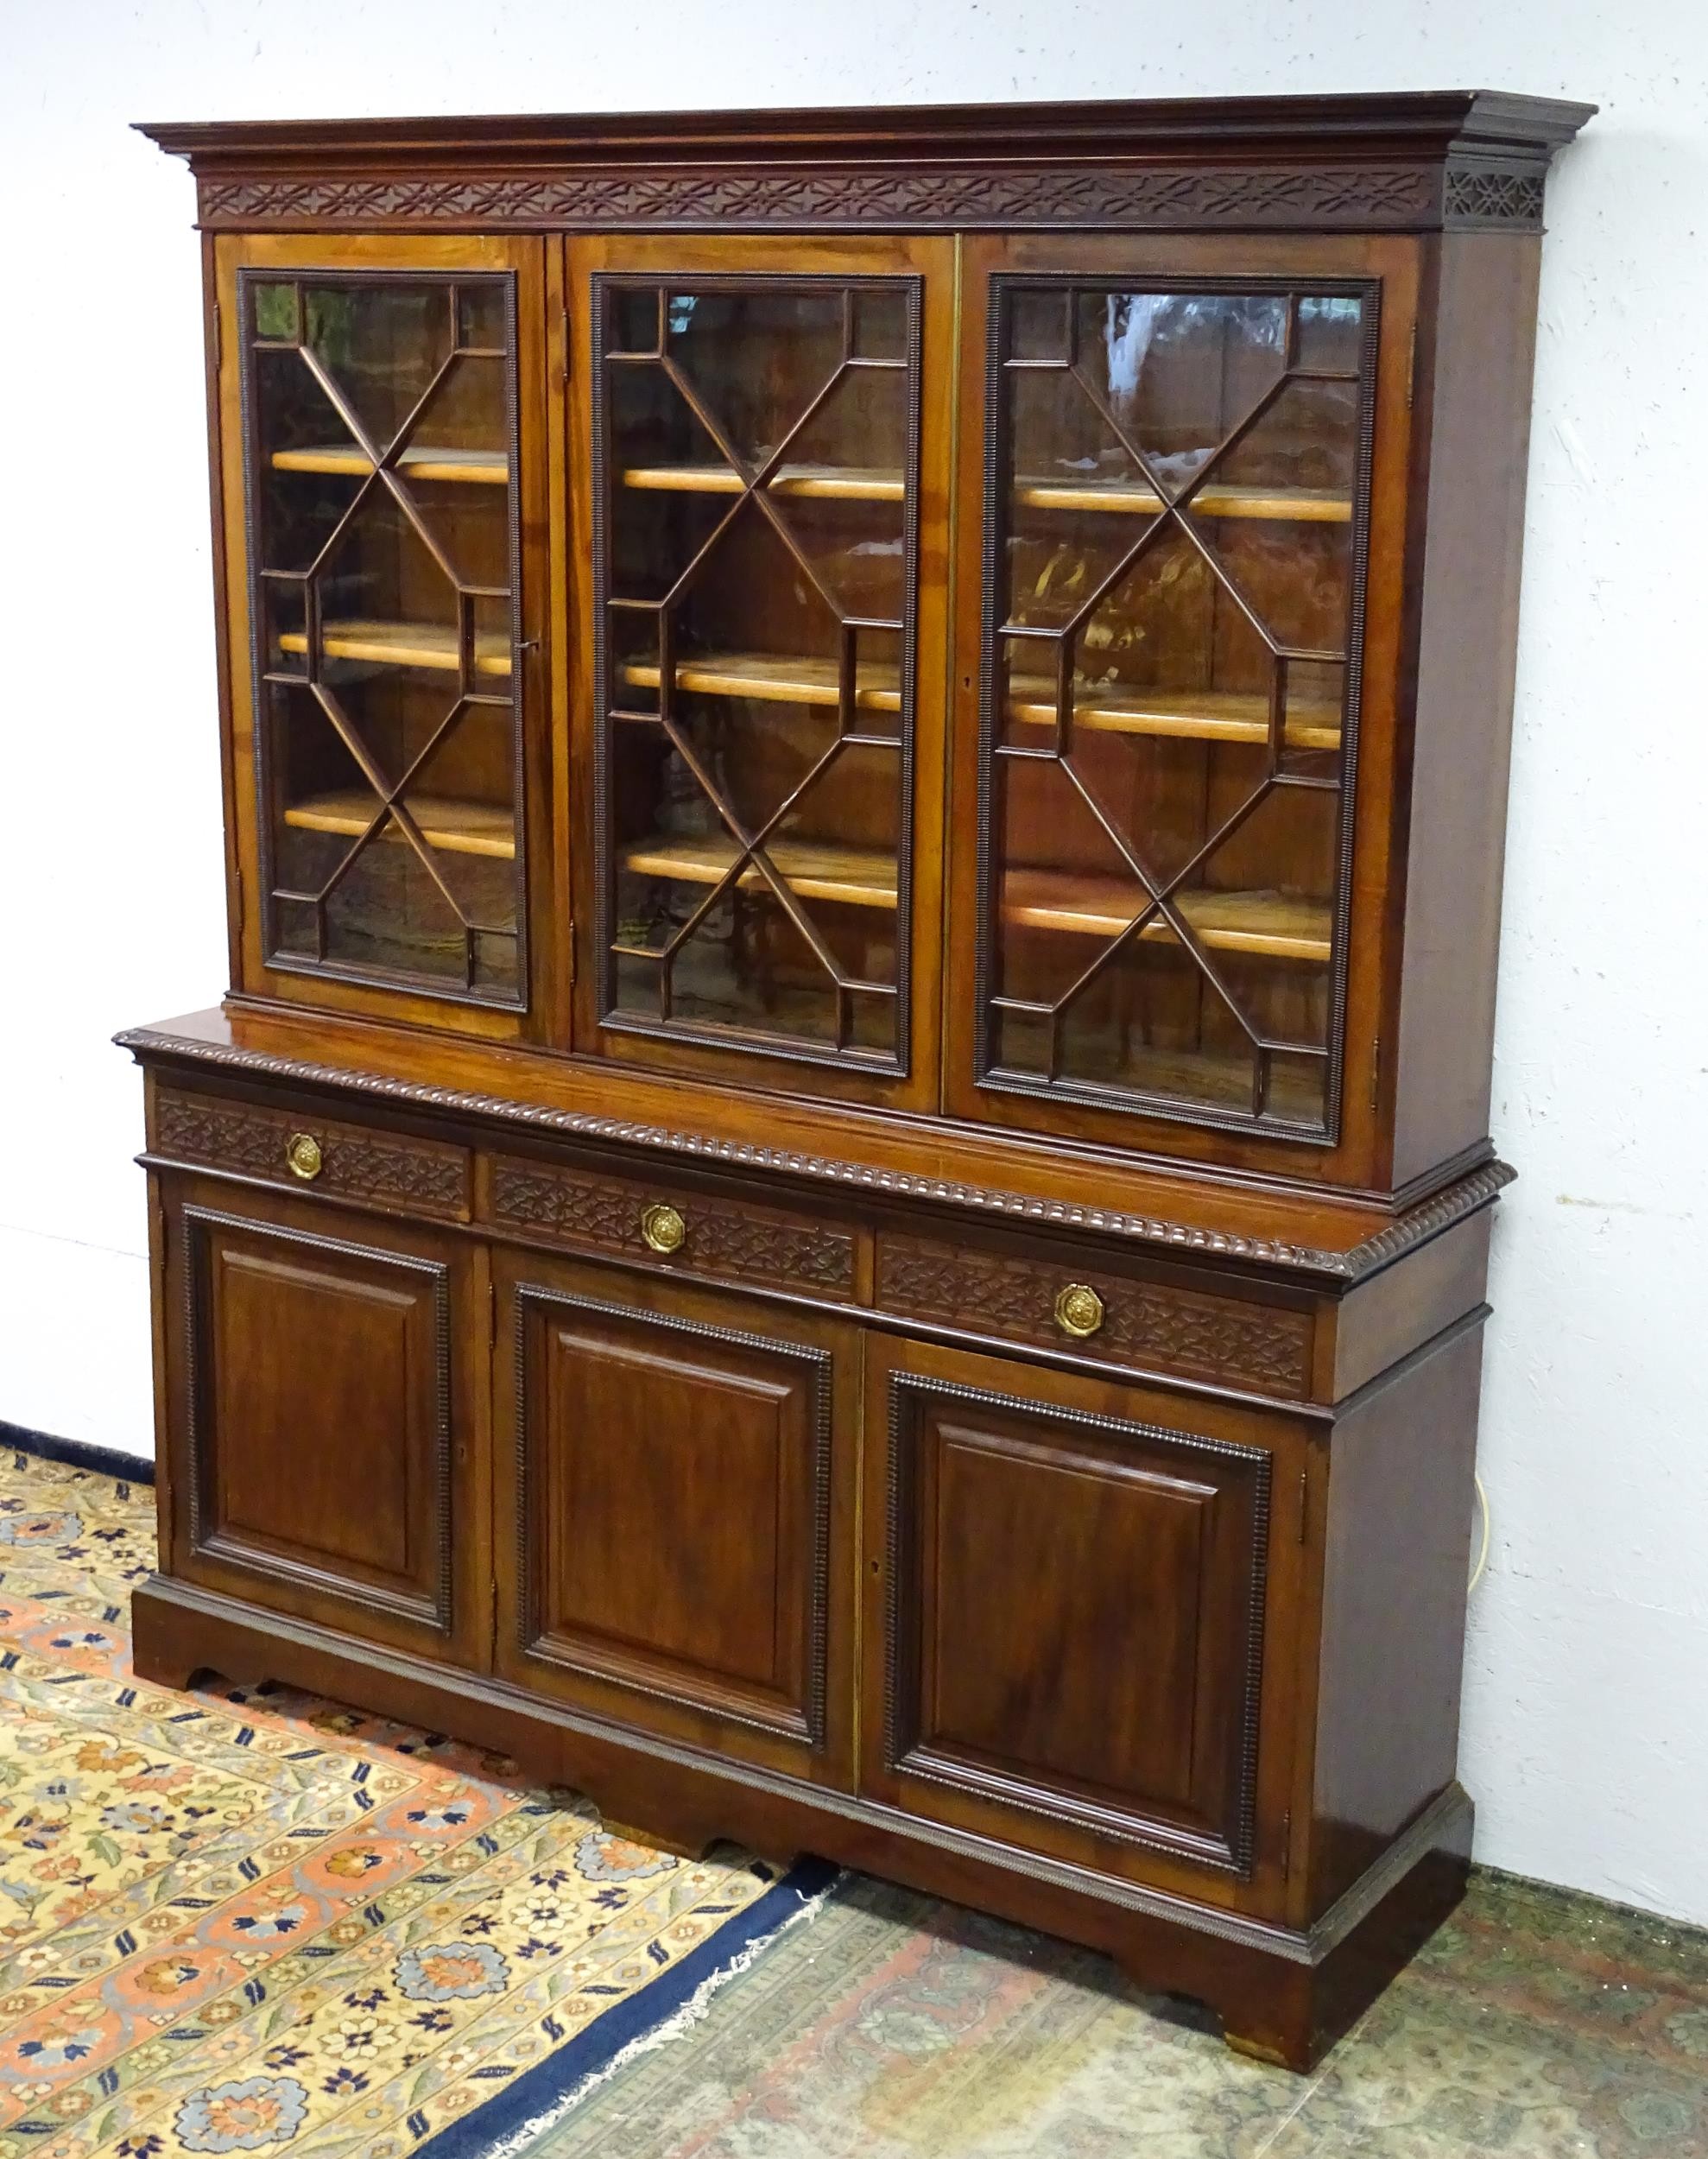 A late 19thC mahogany glazed bookcase by S & H Jewell, Queen Street, London. The cornice with